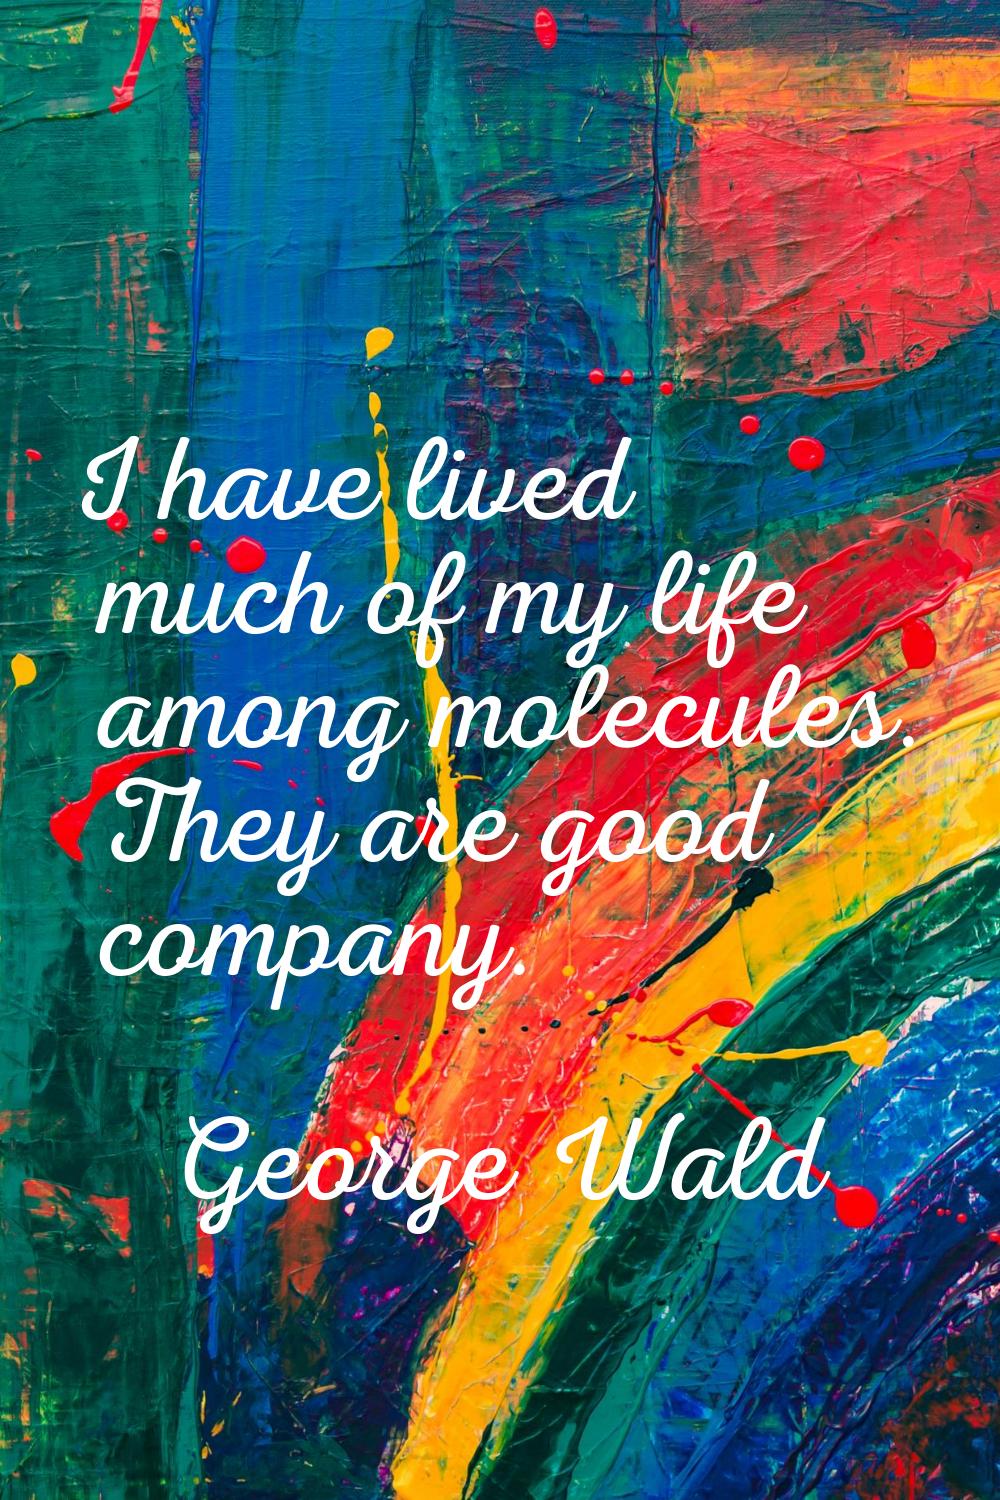 I have lived much of my life among molecules. They are good company.